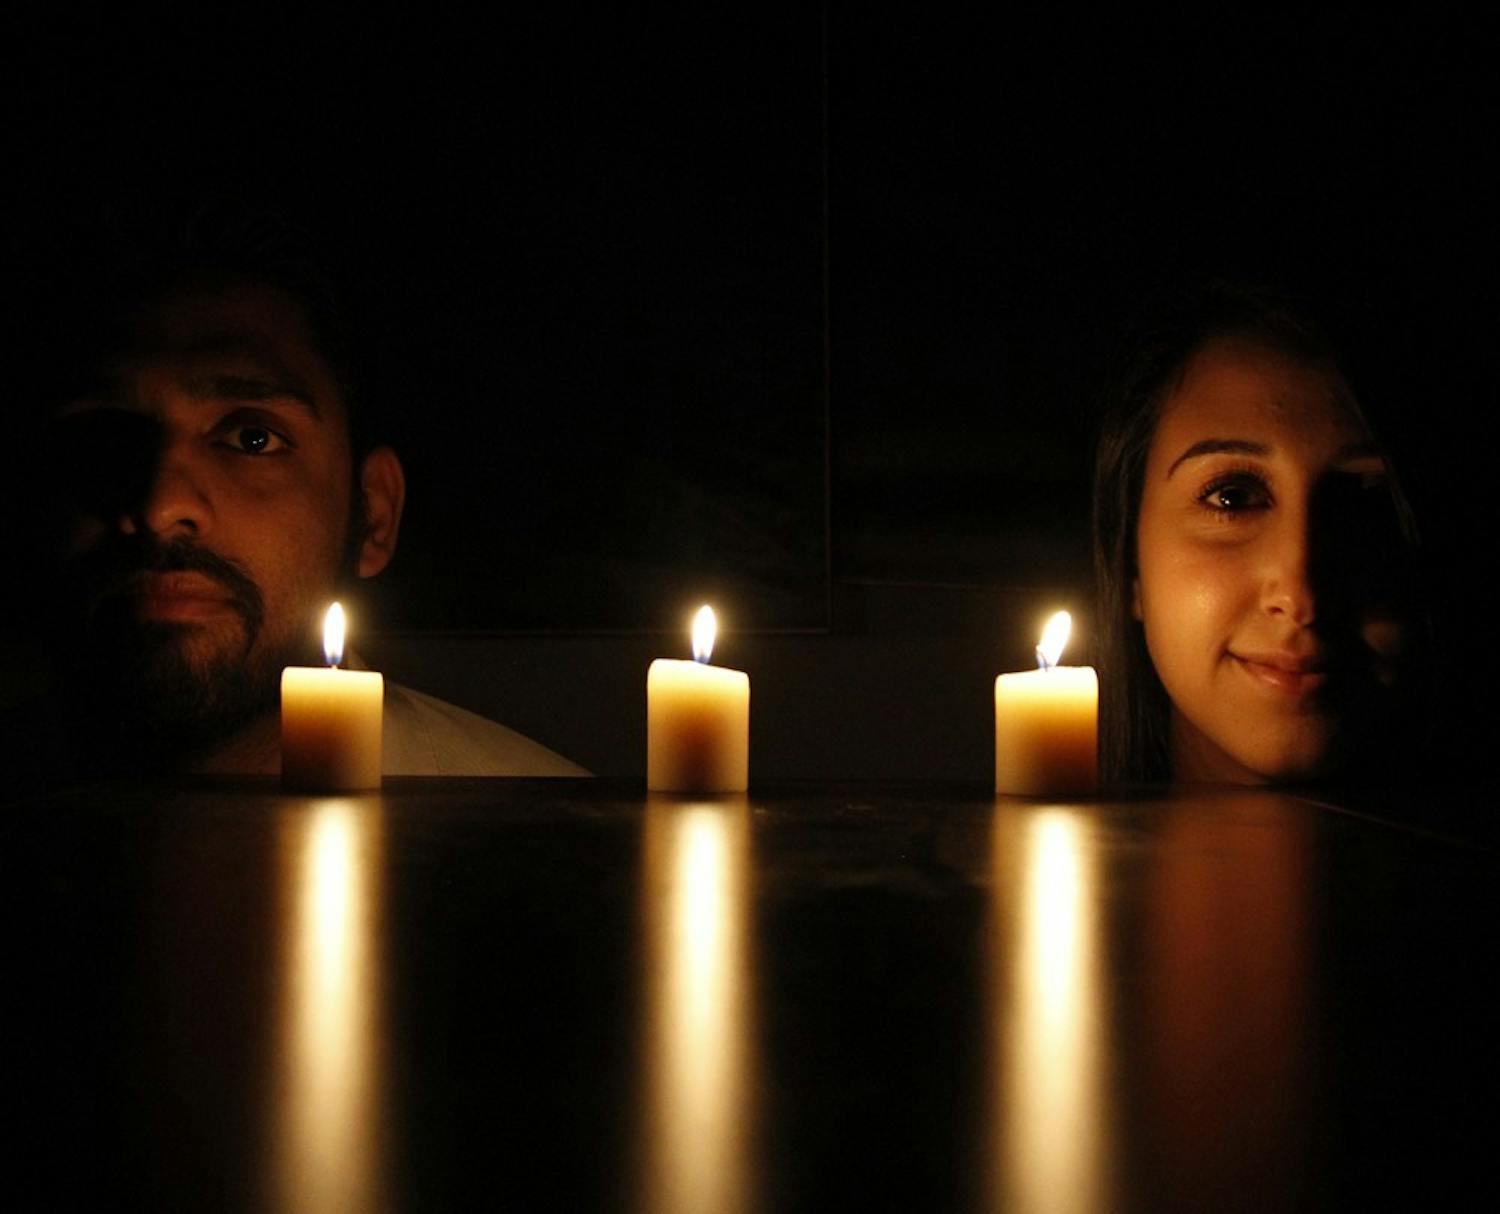 Imad Ahmad (left), Deah's best friend and roommate, and Lina Chaarawi, Yusor and Razan's cousin, pose in front of candles for each of Our Three Winners.